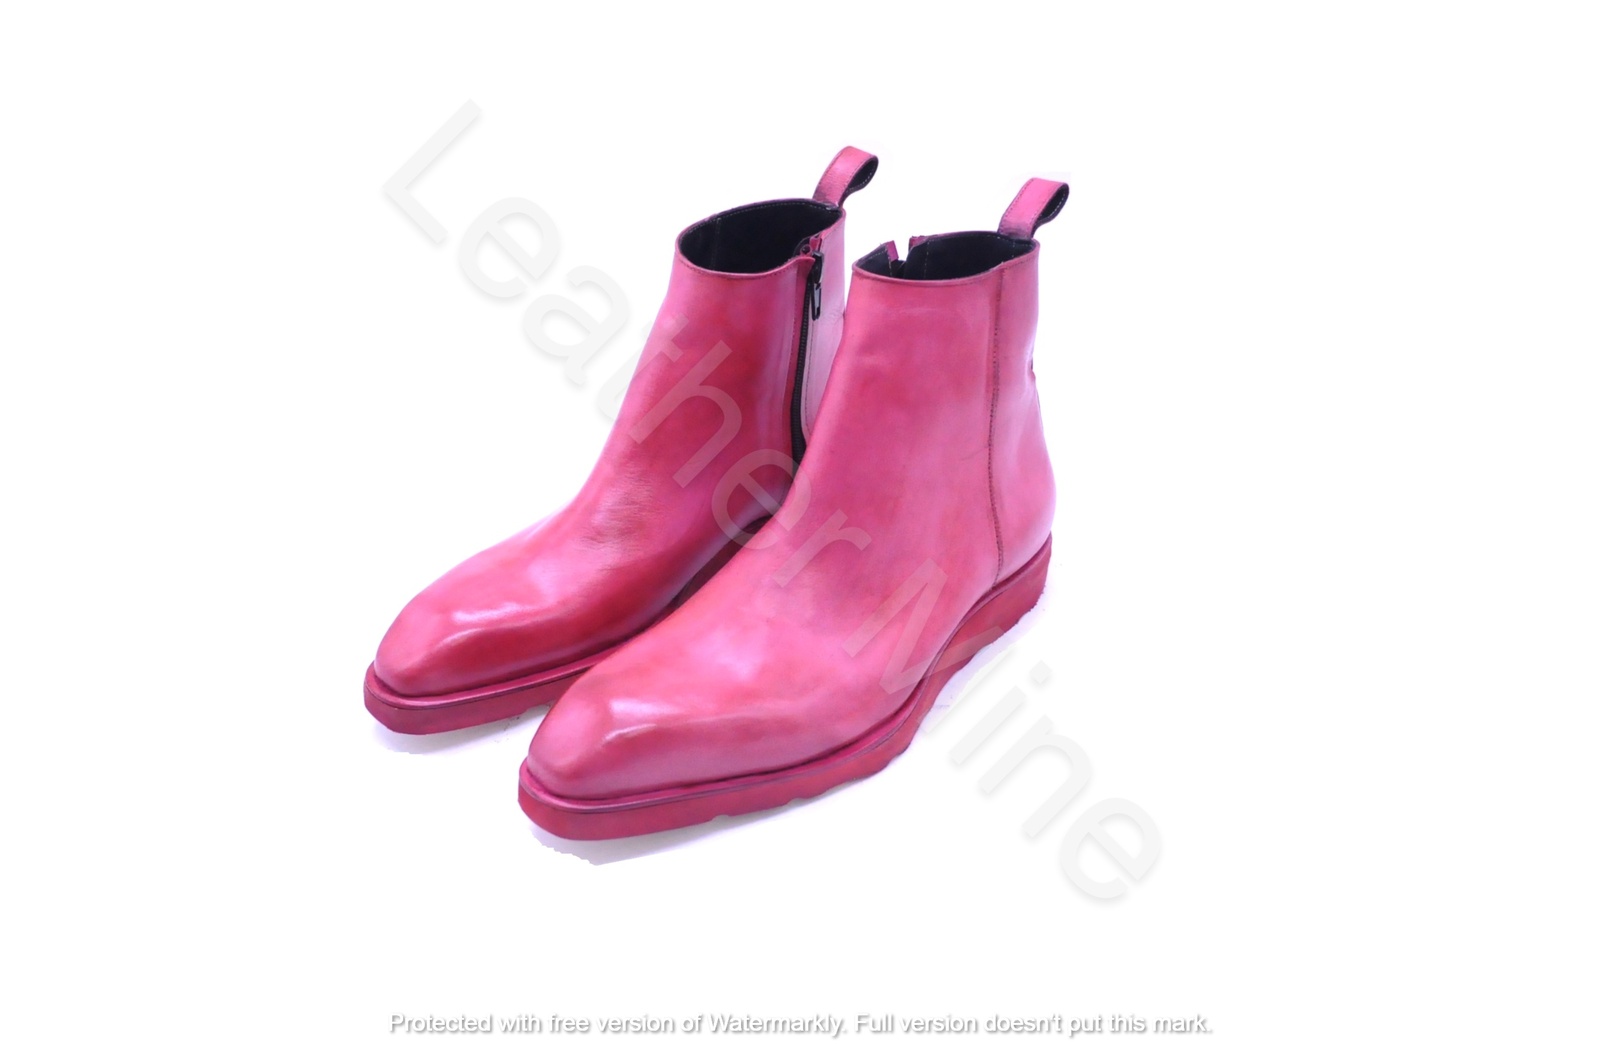 Men's Handmade Pink Leather Ankle High Dress Boots, Custom Made Formal Boots